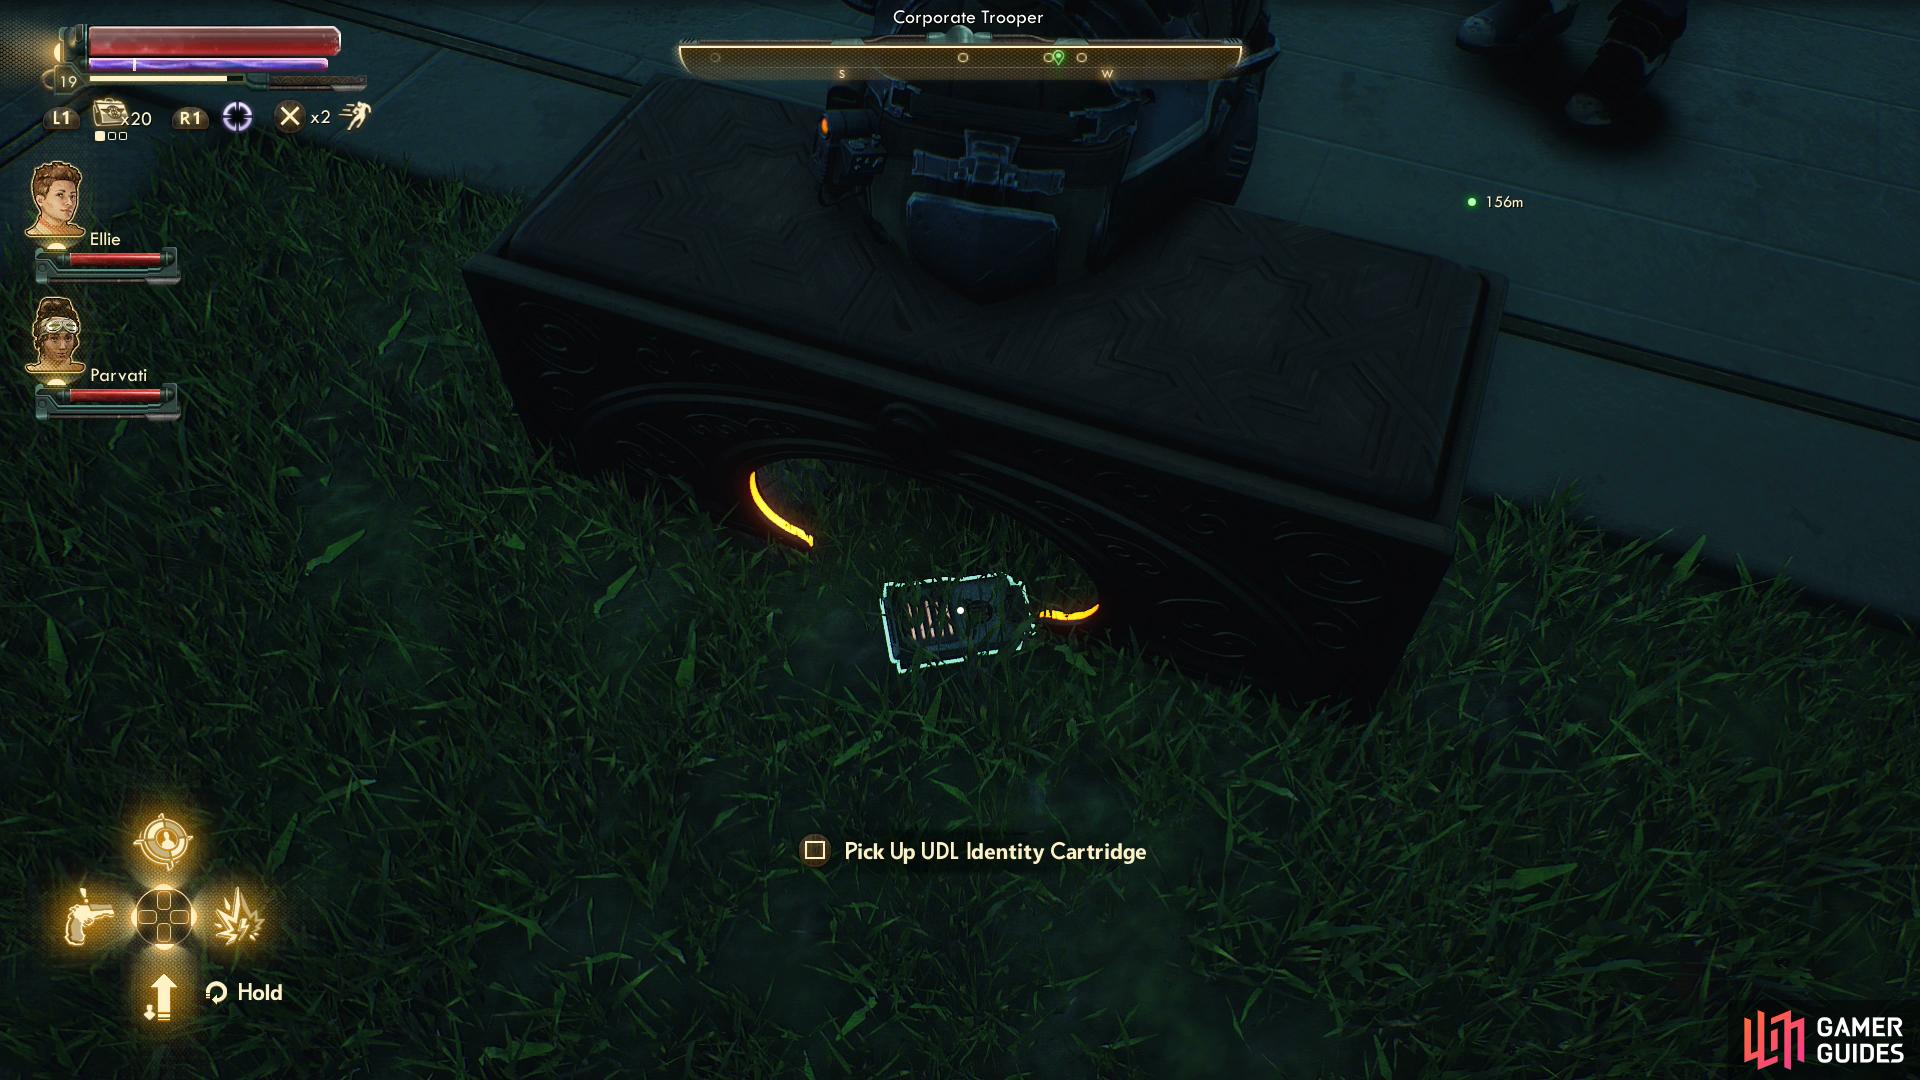 You can find a UDL ID Cartridge under a bench near the canal